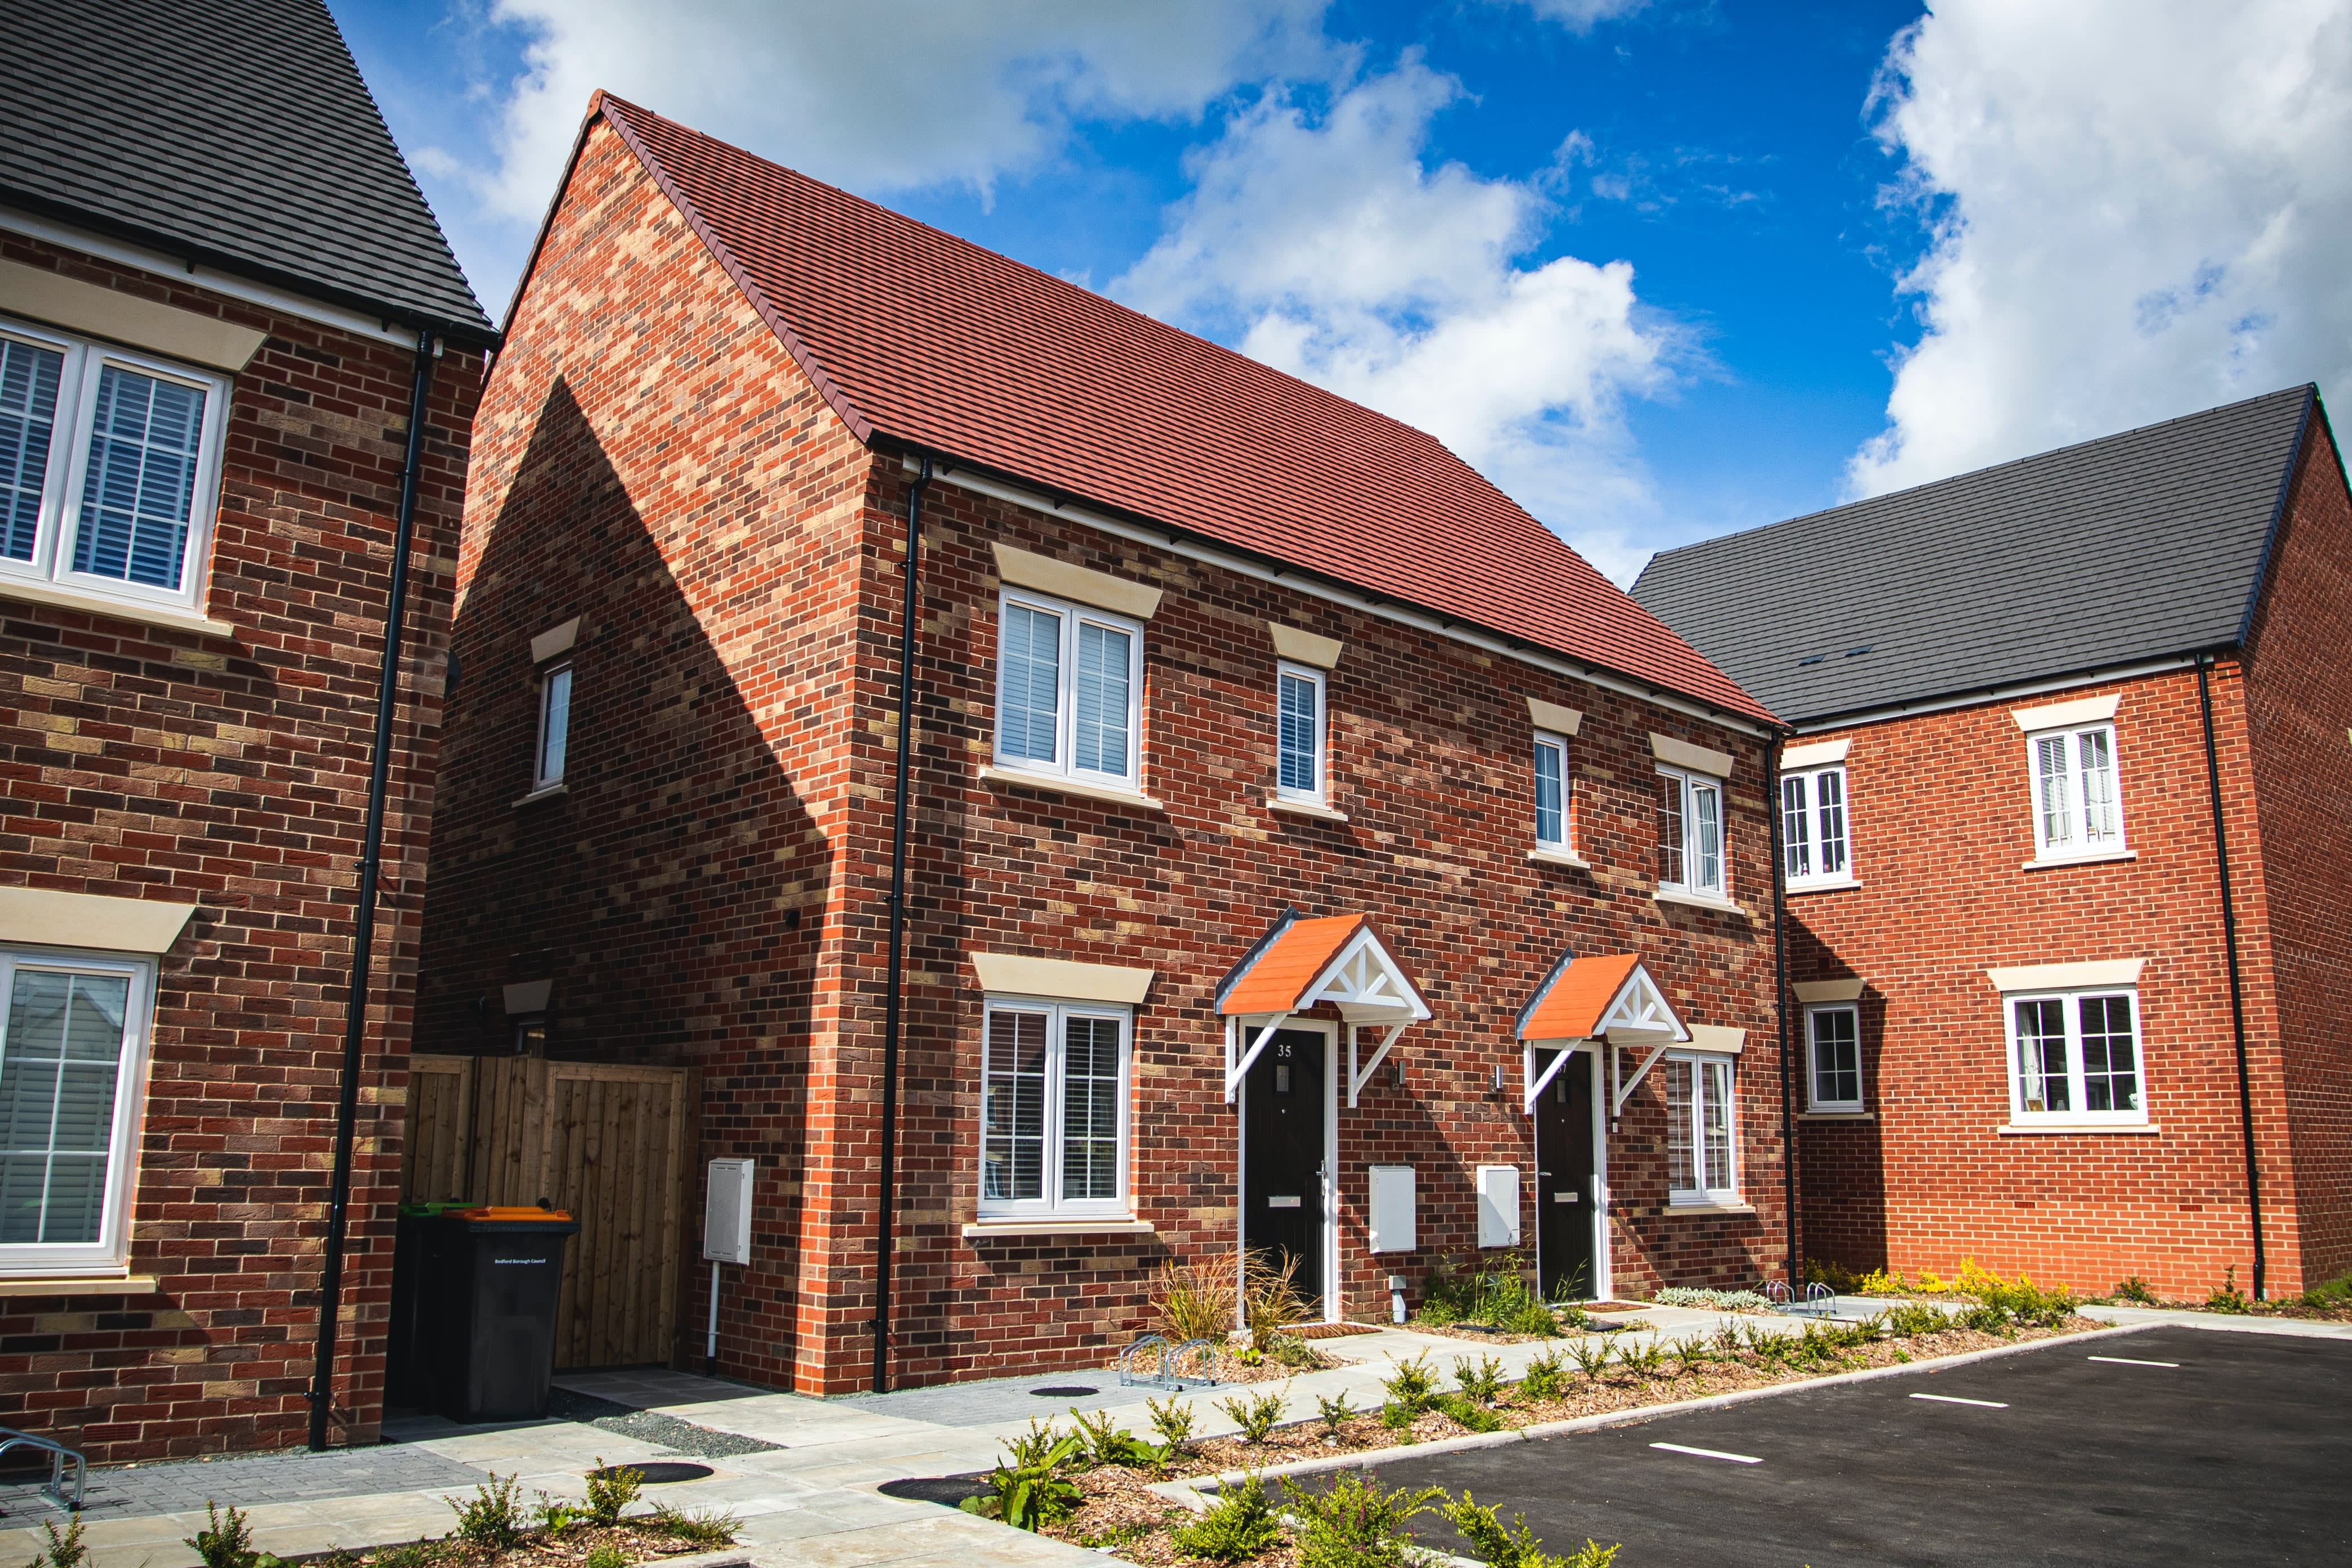 Buy-to-let has reduced housing stock over 25 years